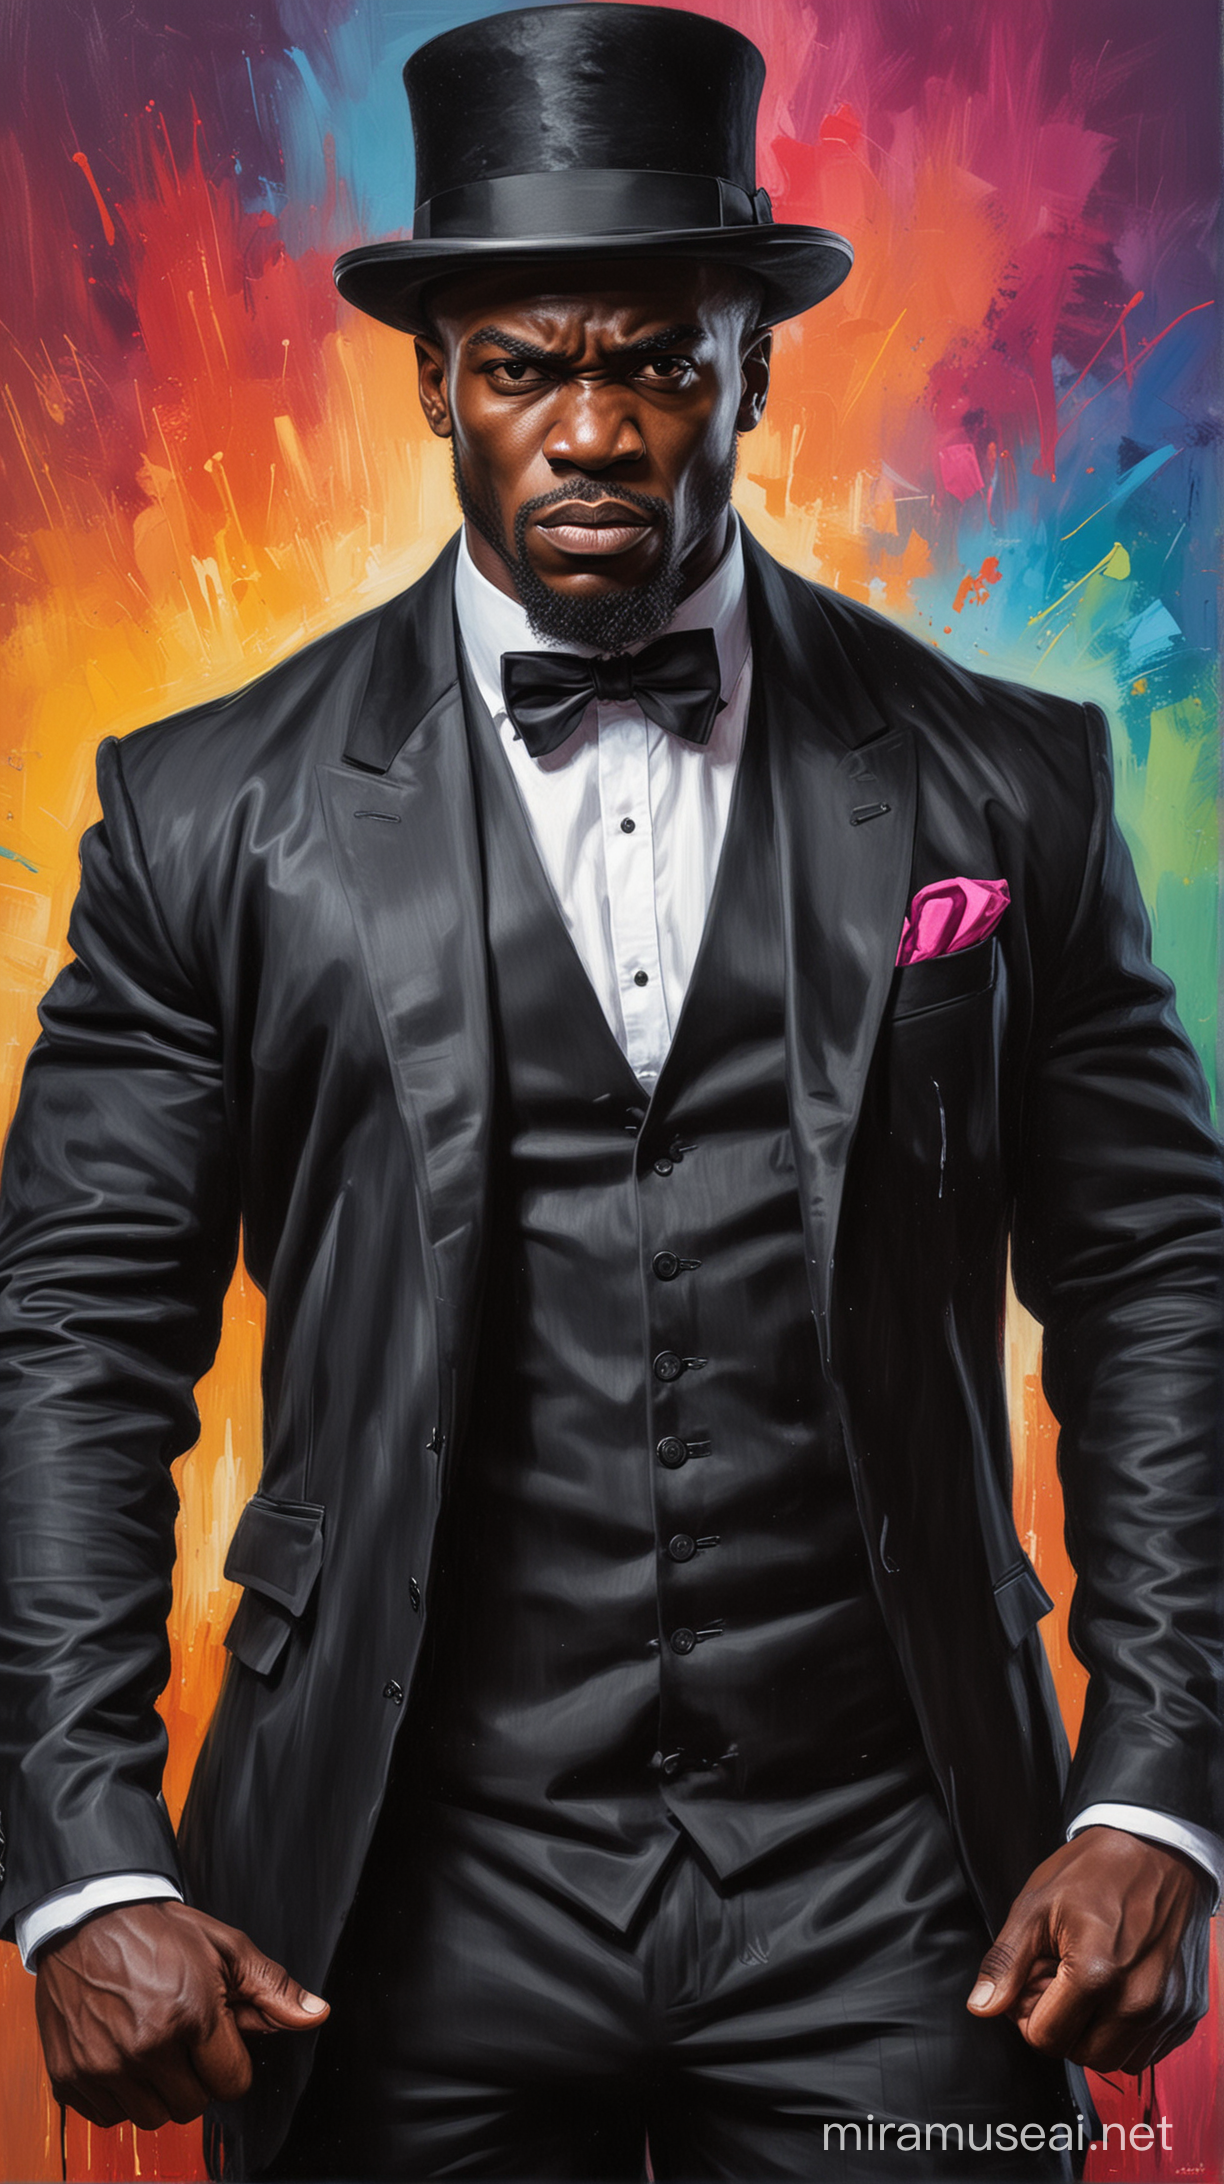 Furious African Man in Stylish Top Hat and Jacket Against Vibrant Backdrop